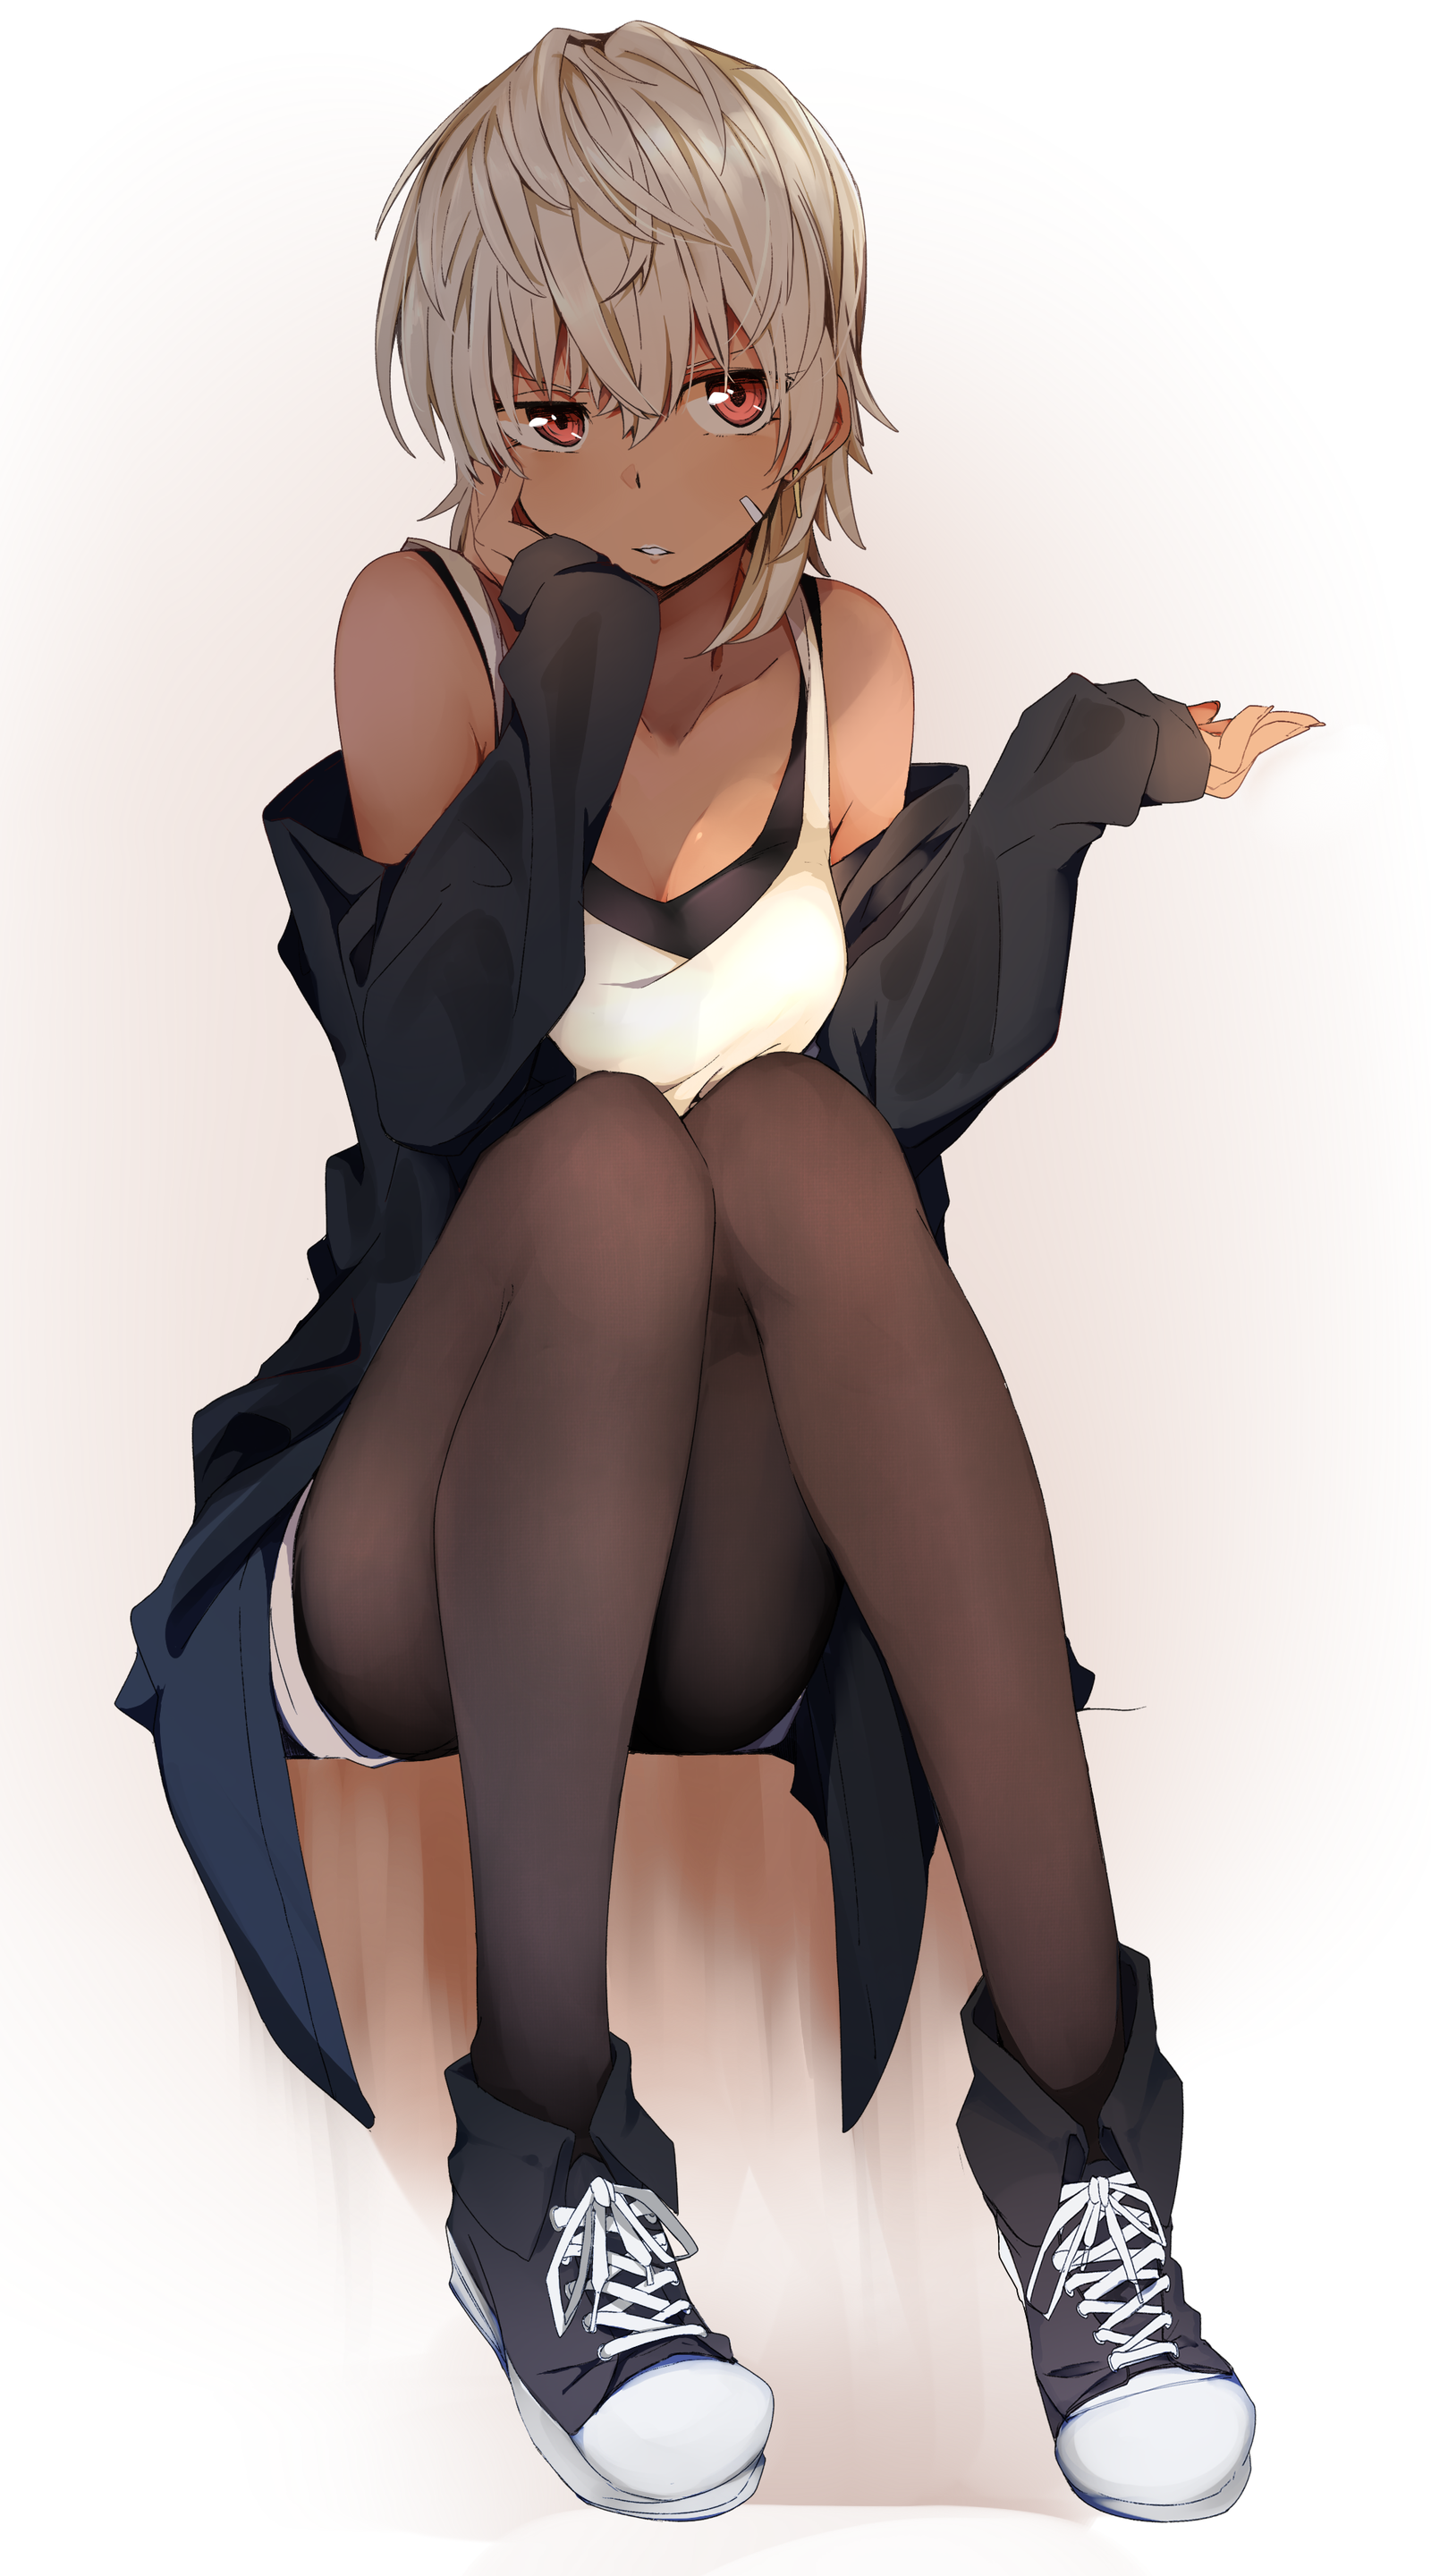 What are you looking at? - Art, Anime original, Pixiv, Anime art, Anime